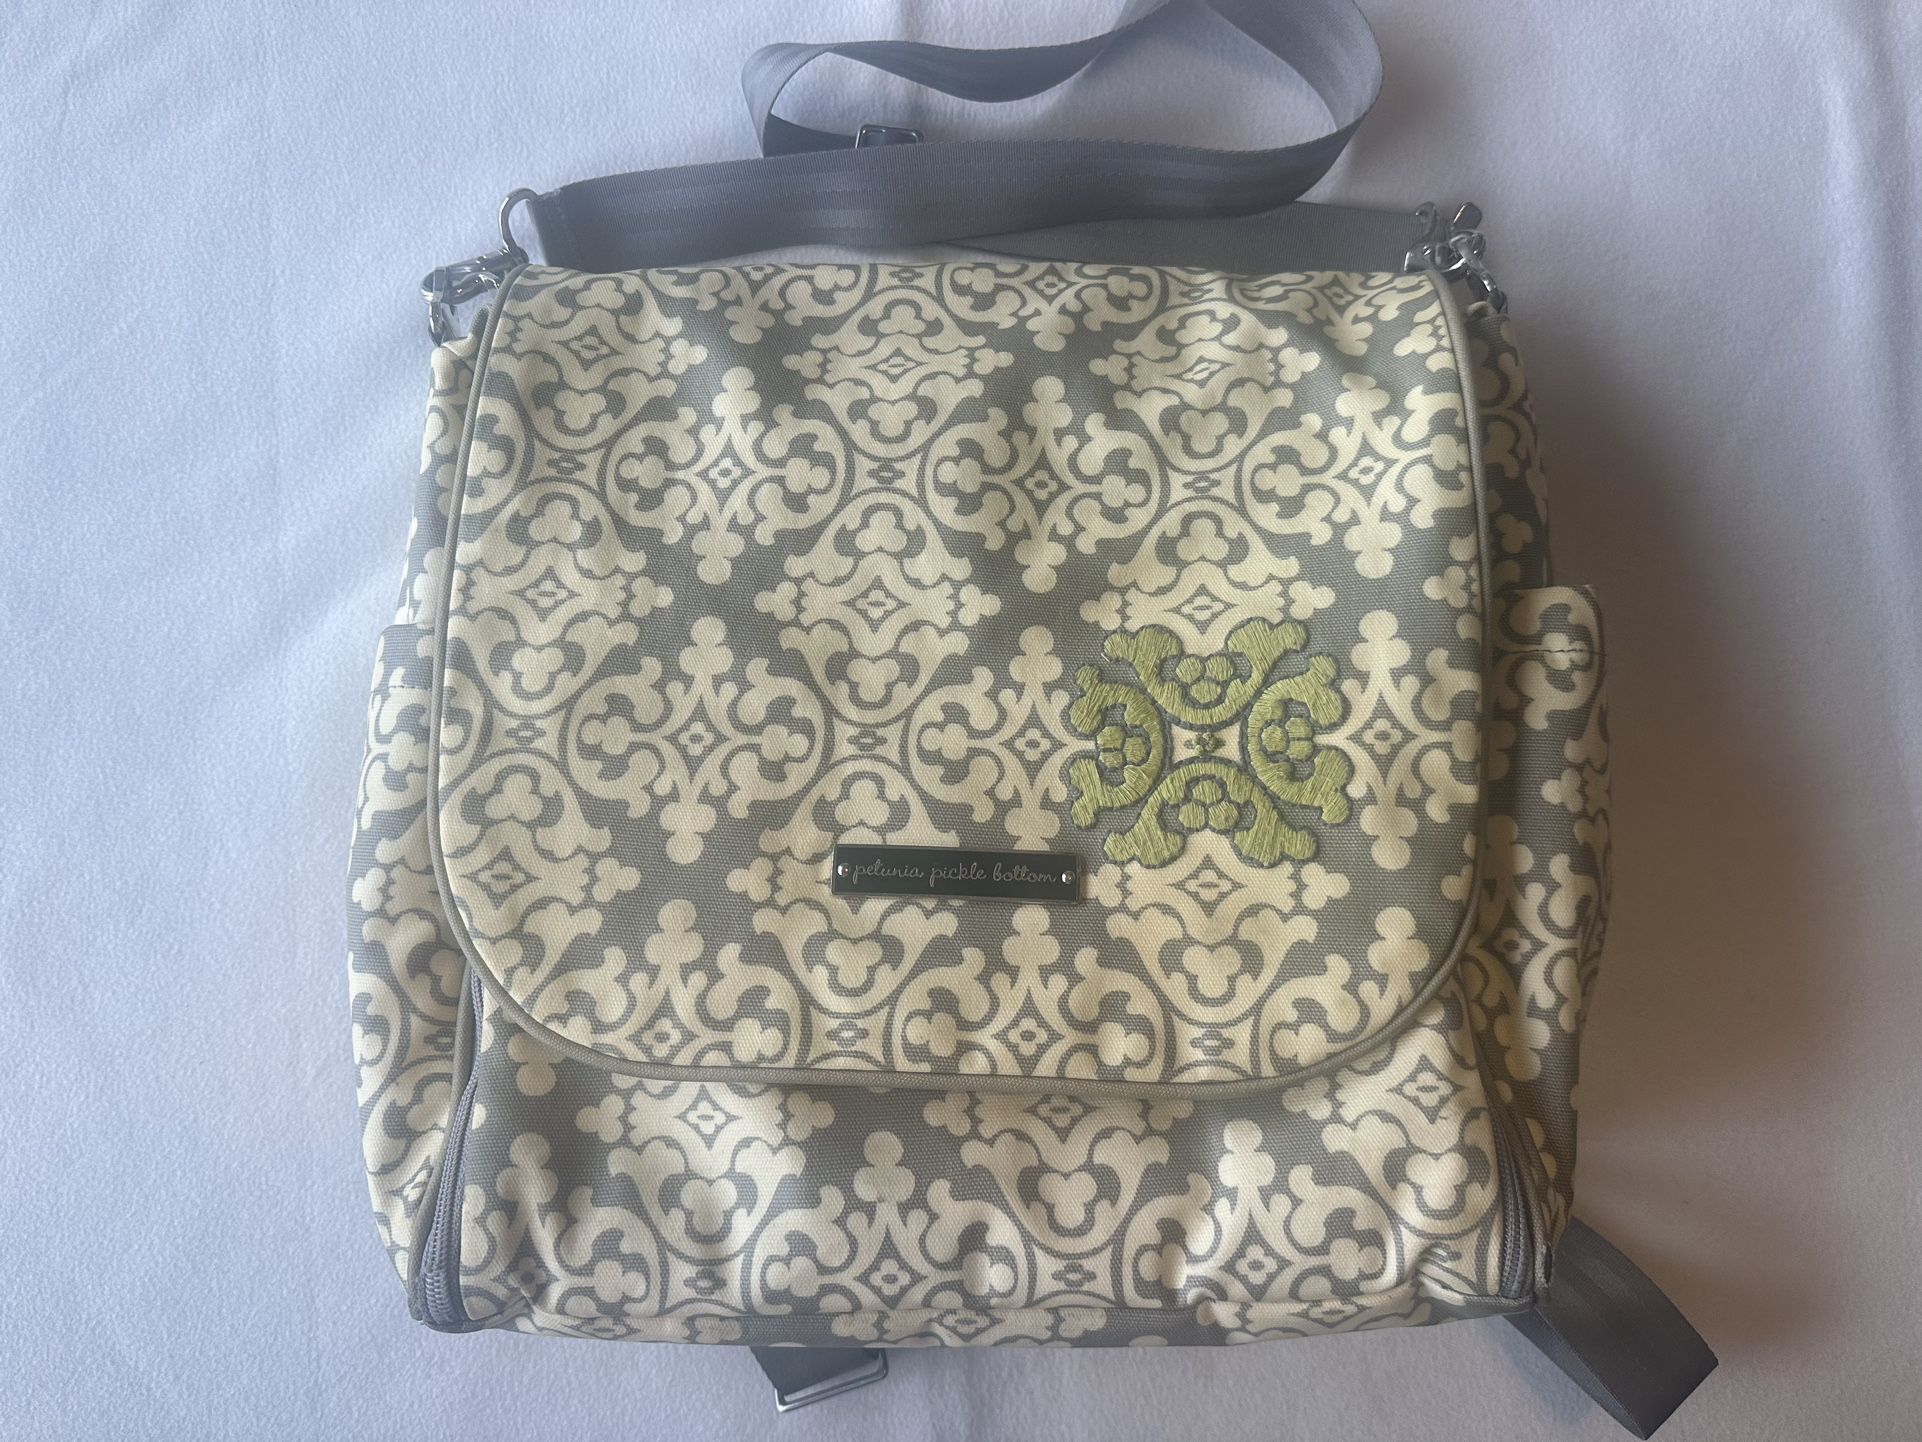 Petunia Pickle Bottom Lime Green Paisley Boxy Backpack Tote Baby Diaper Bag